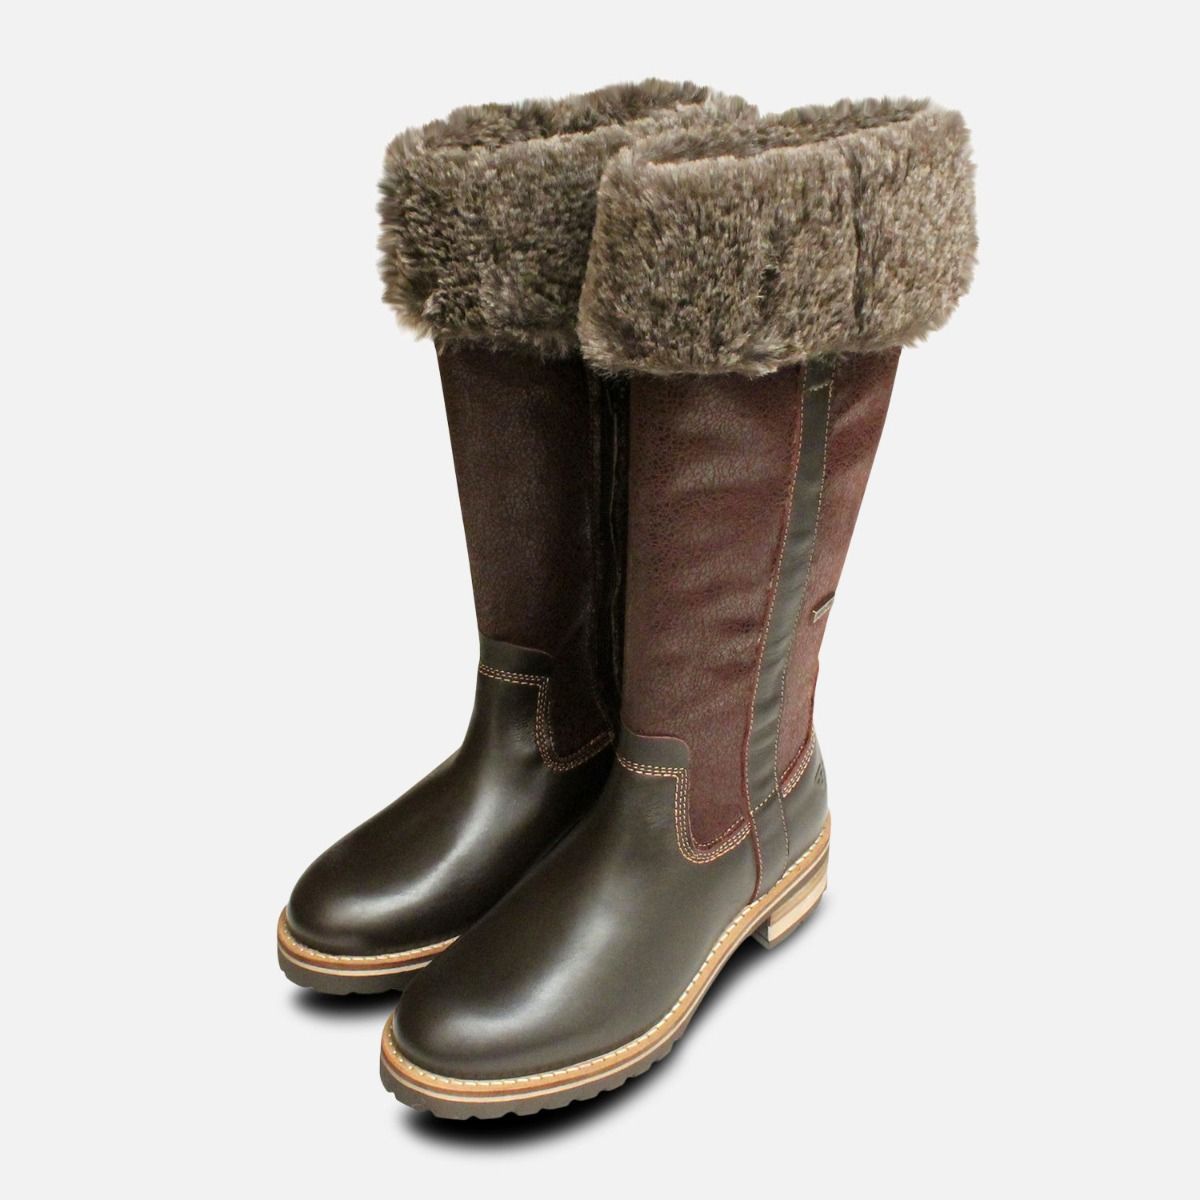 Warm Fur Lined Tamaris Long Boots in 